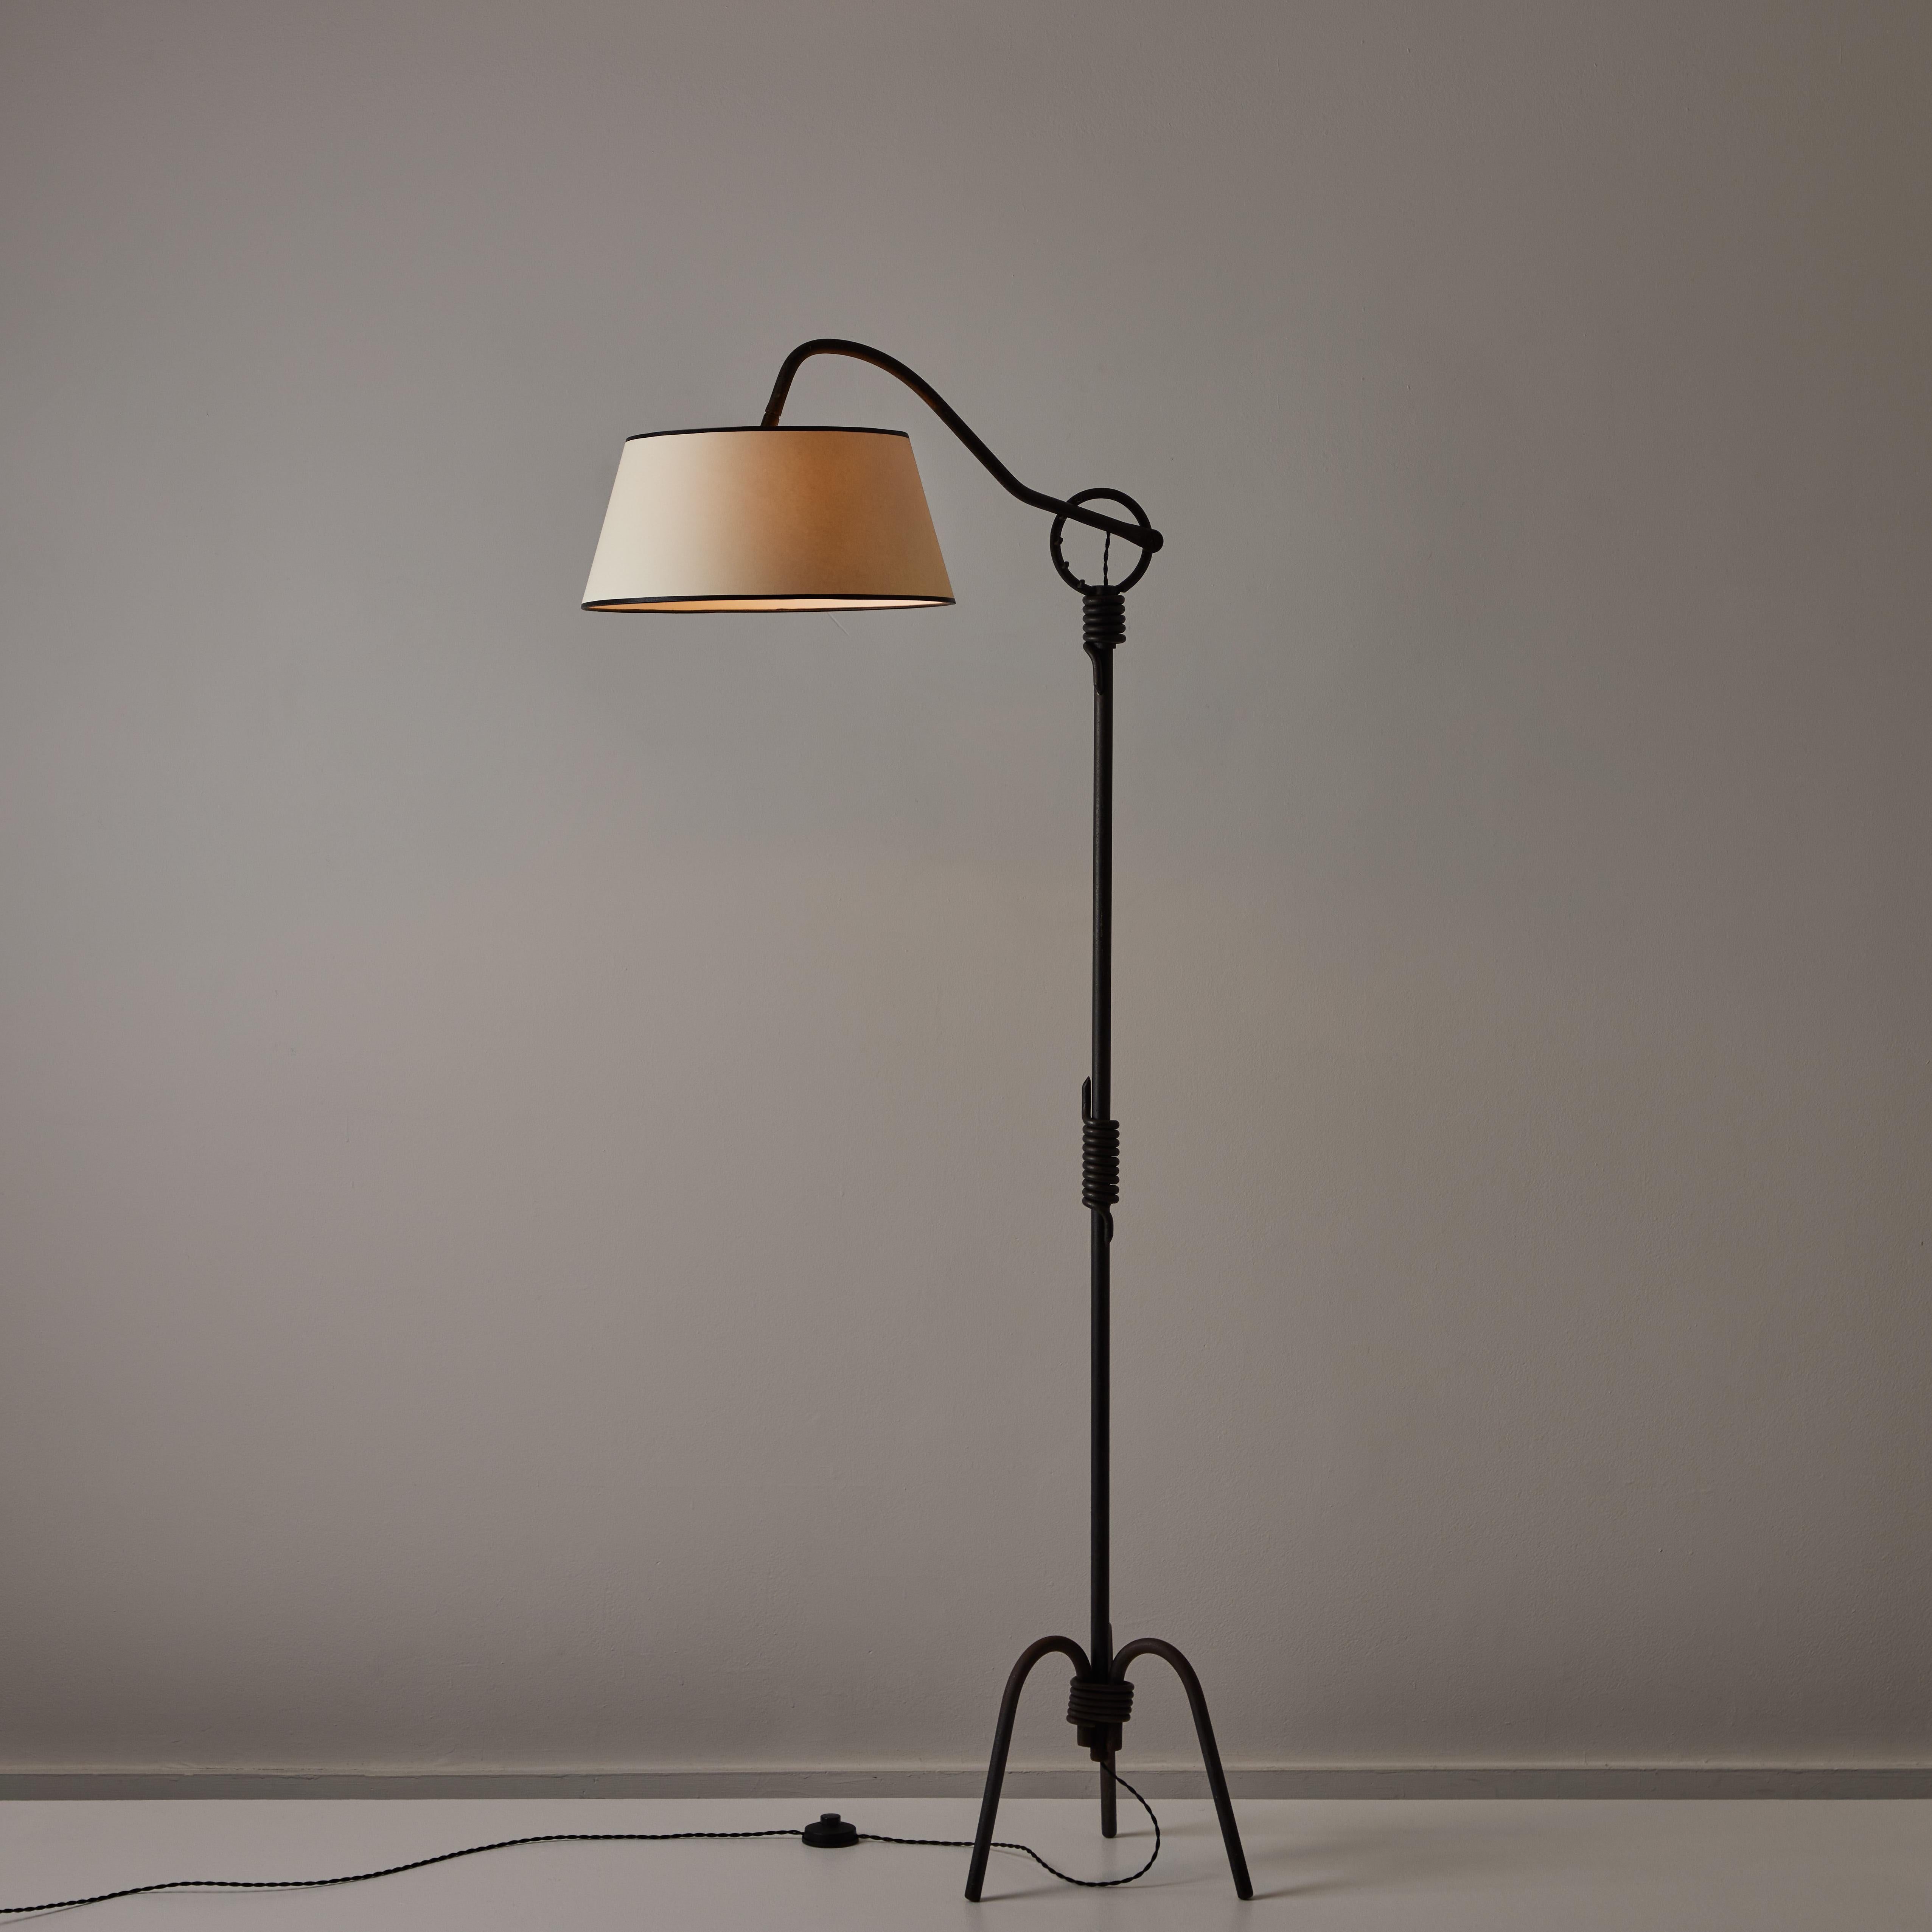 French Floor Lamp. Designed in France, in 1959. The floor lamp consists of a wrought iron base, featuring wrapped metal detail on the top, middle and bottom of the stem. The iron base consists of a three-footed tripod. The socket is an E27 socket,